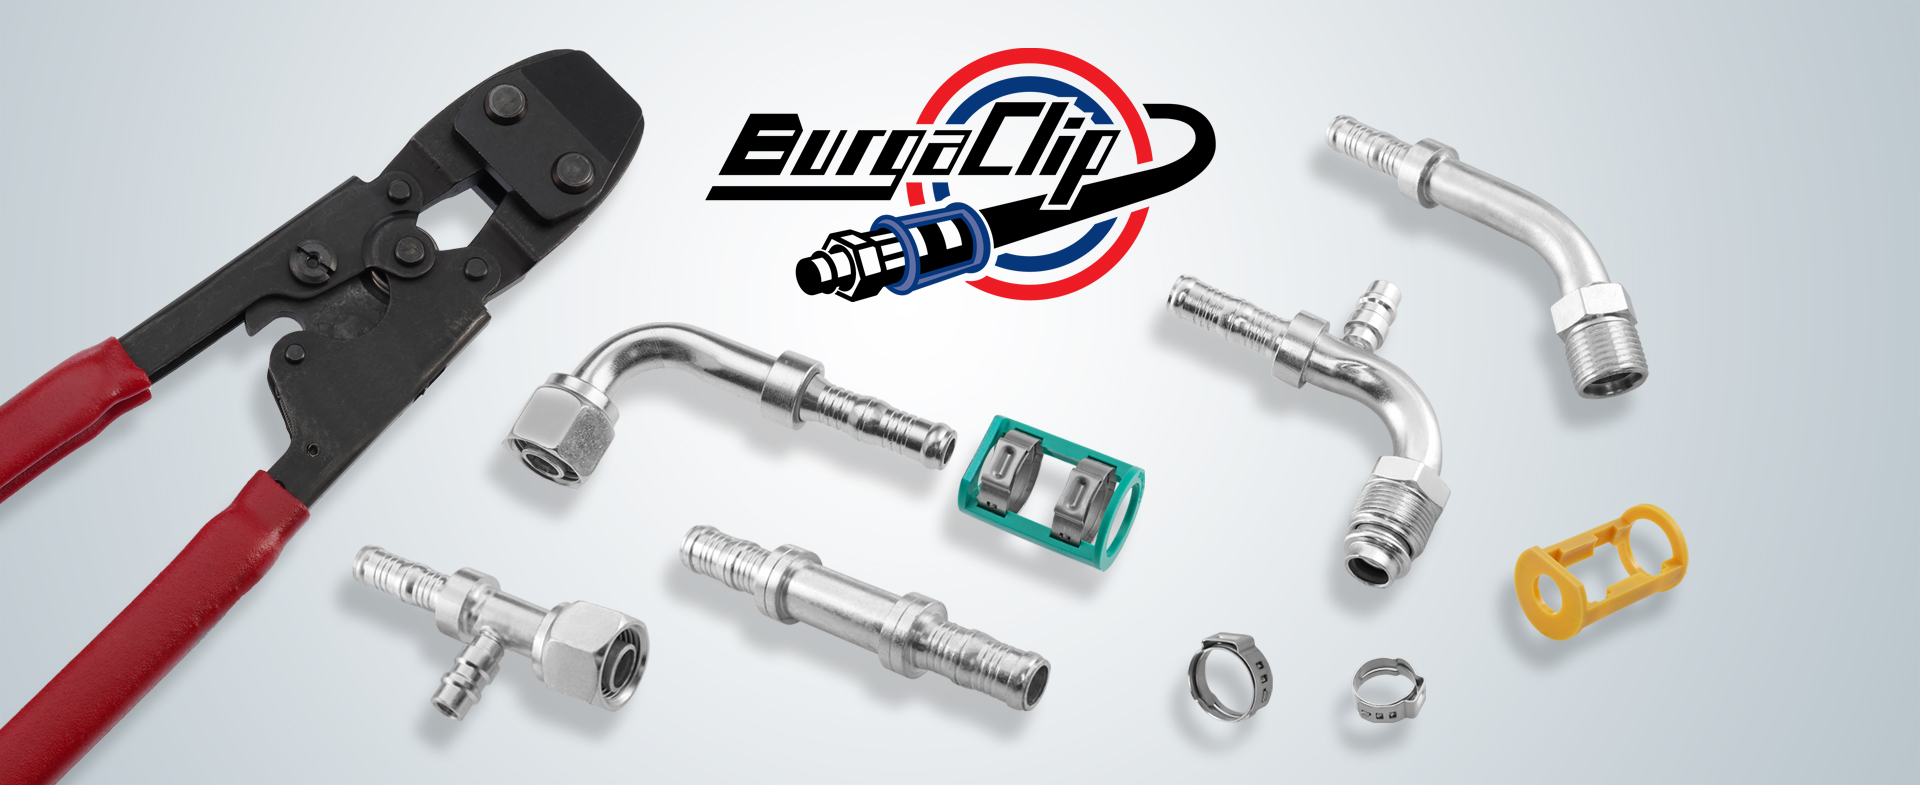 Automann is pleased to add the BurgaClip® brand to its offering